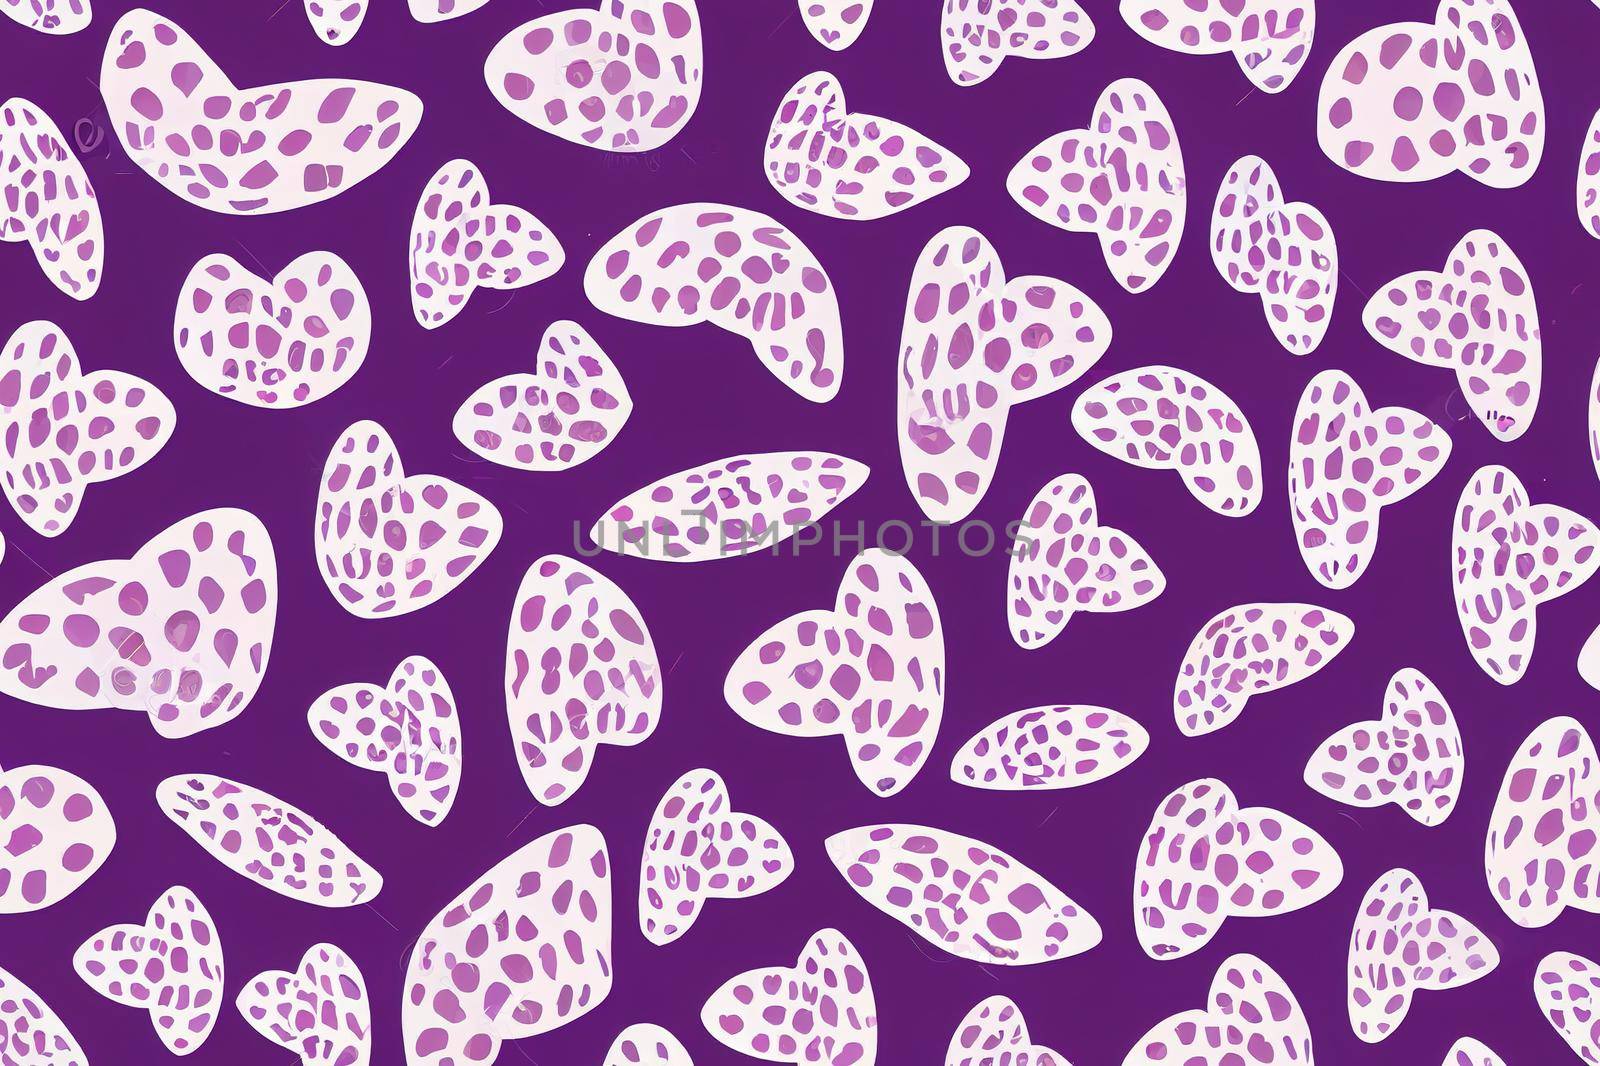 Leopard from hearts and kitten cute faces seamless pattern. illustration.